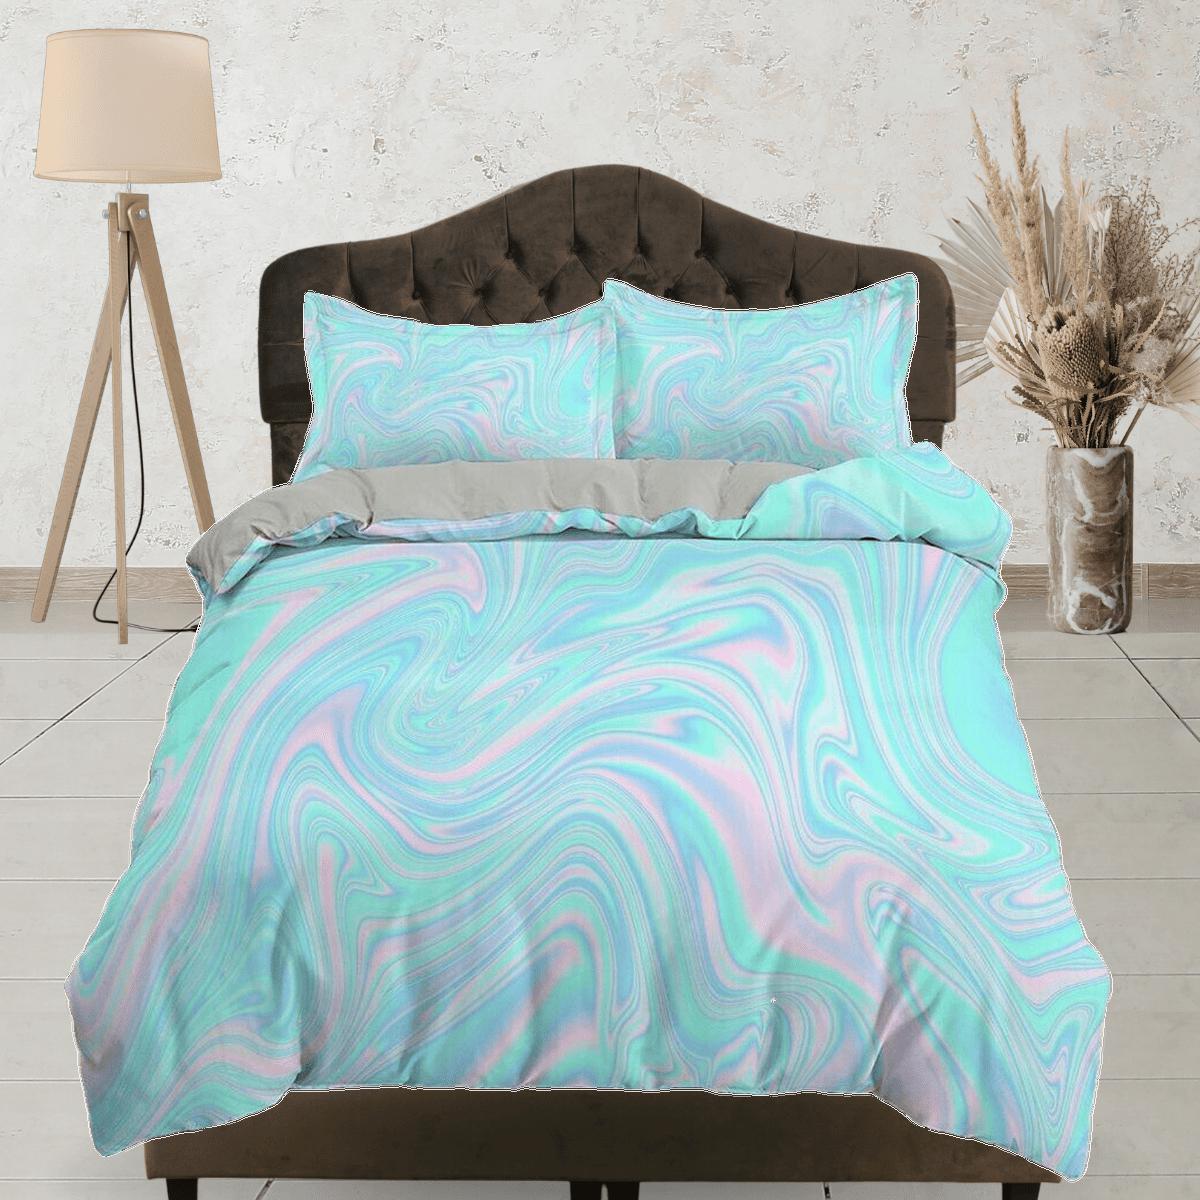 daintyduvet Cyan blue and pink pastel colors contemporary bedroom set aesthetic duvet cover, marble abstract art room decor boho chic bedding set full